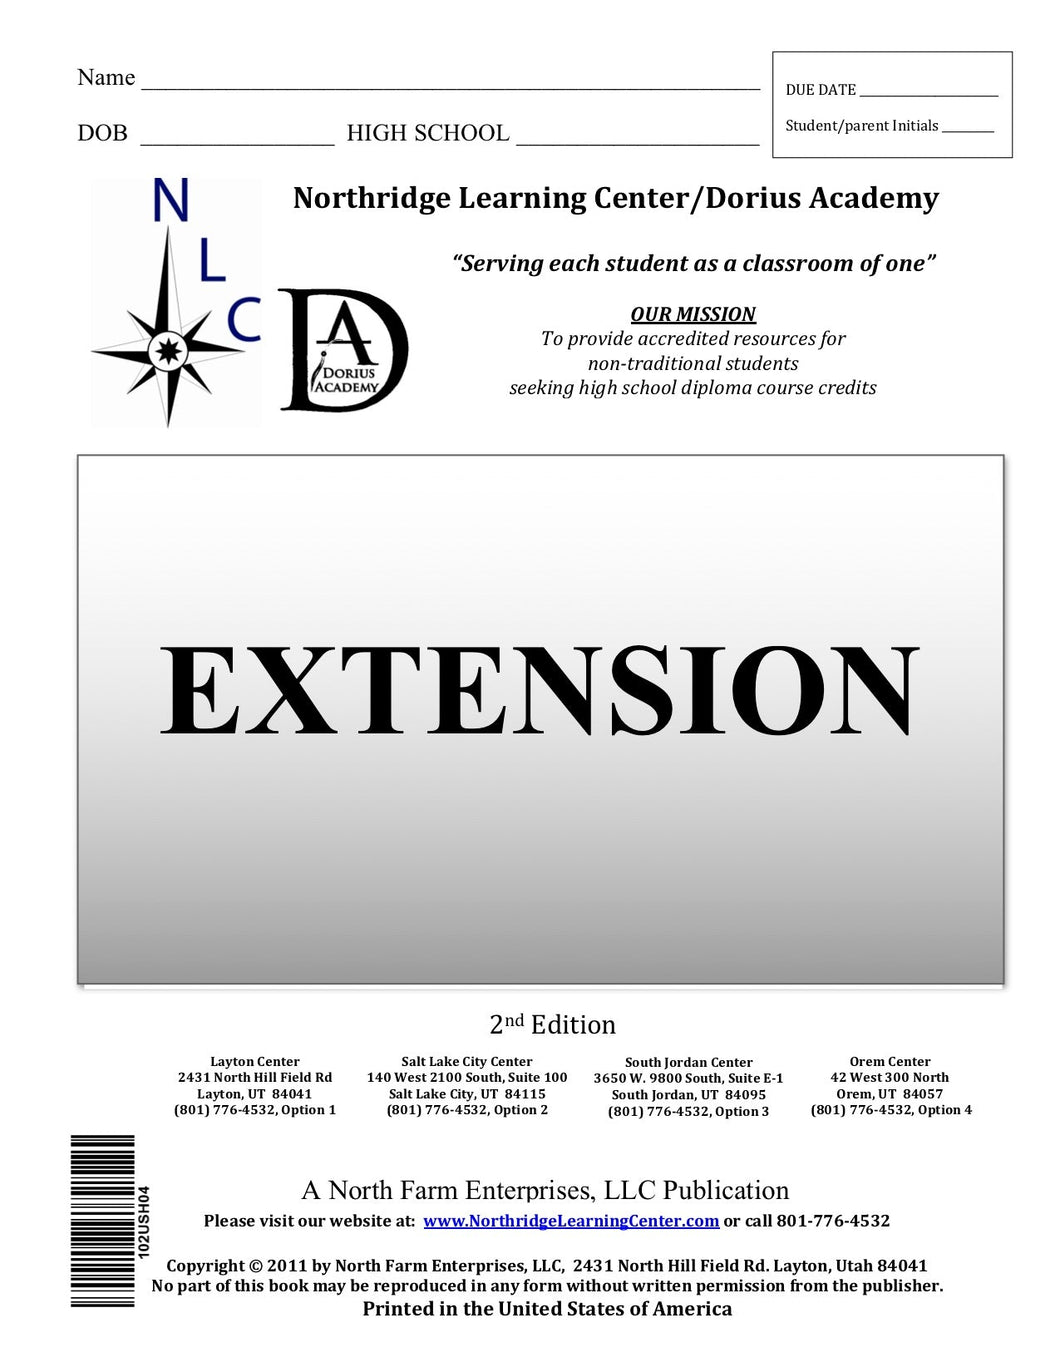 Language Arts 12, Section II - Extension